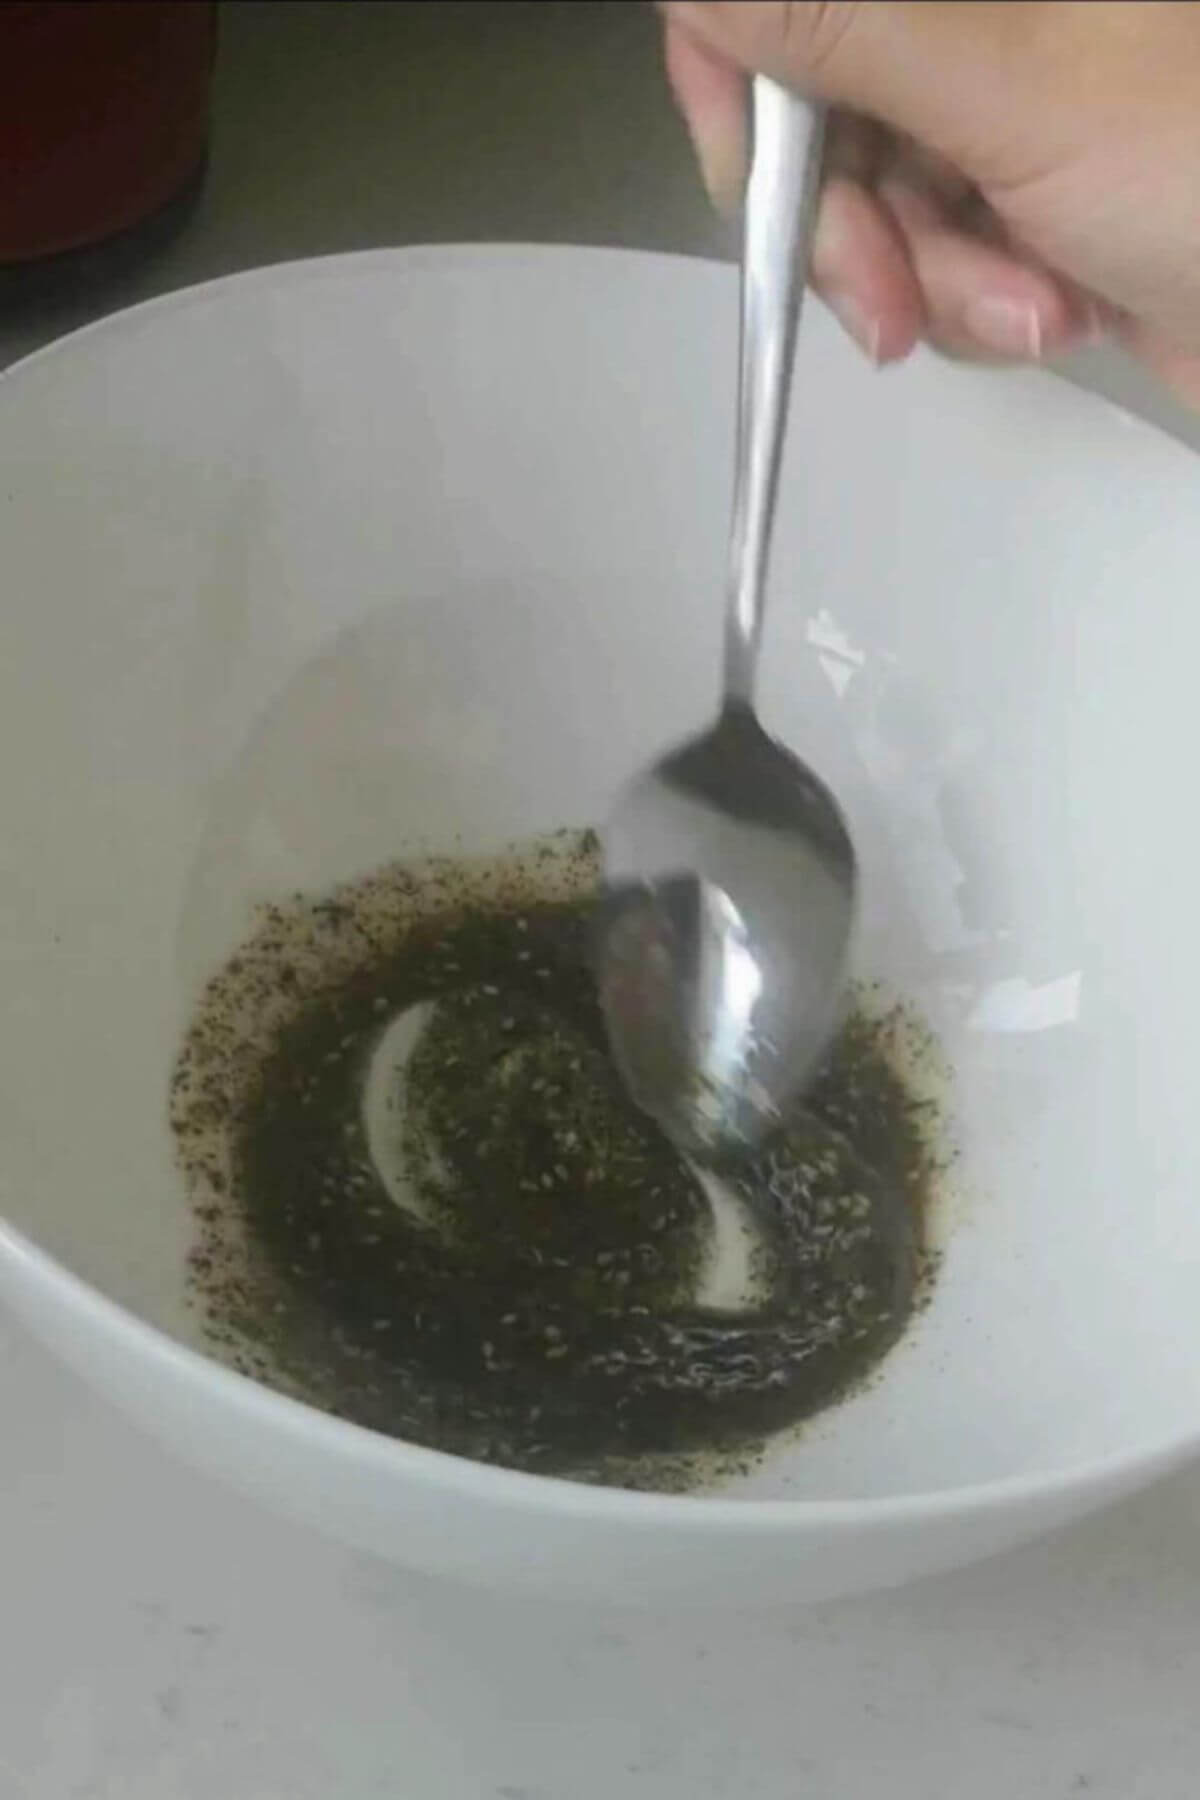 Silver spoon mixing za'atar and oil in a large white bowl.